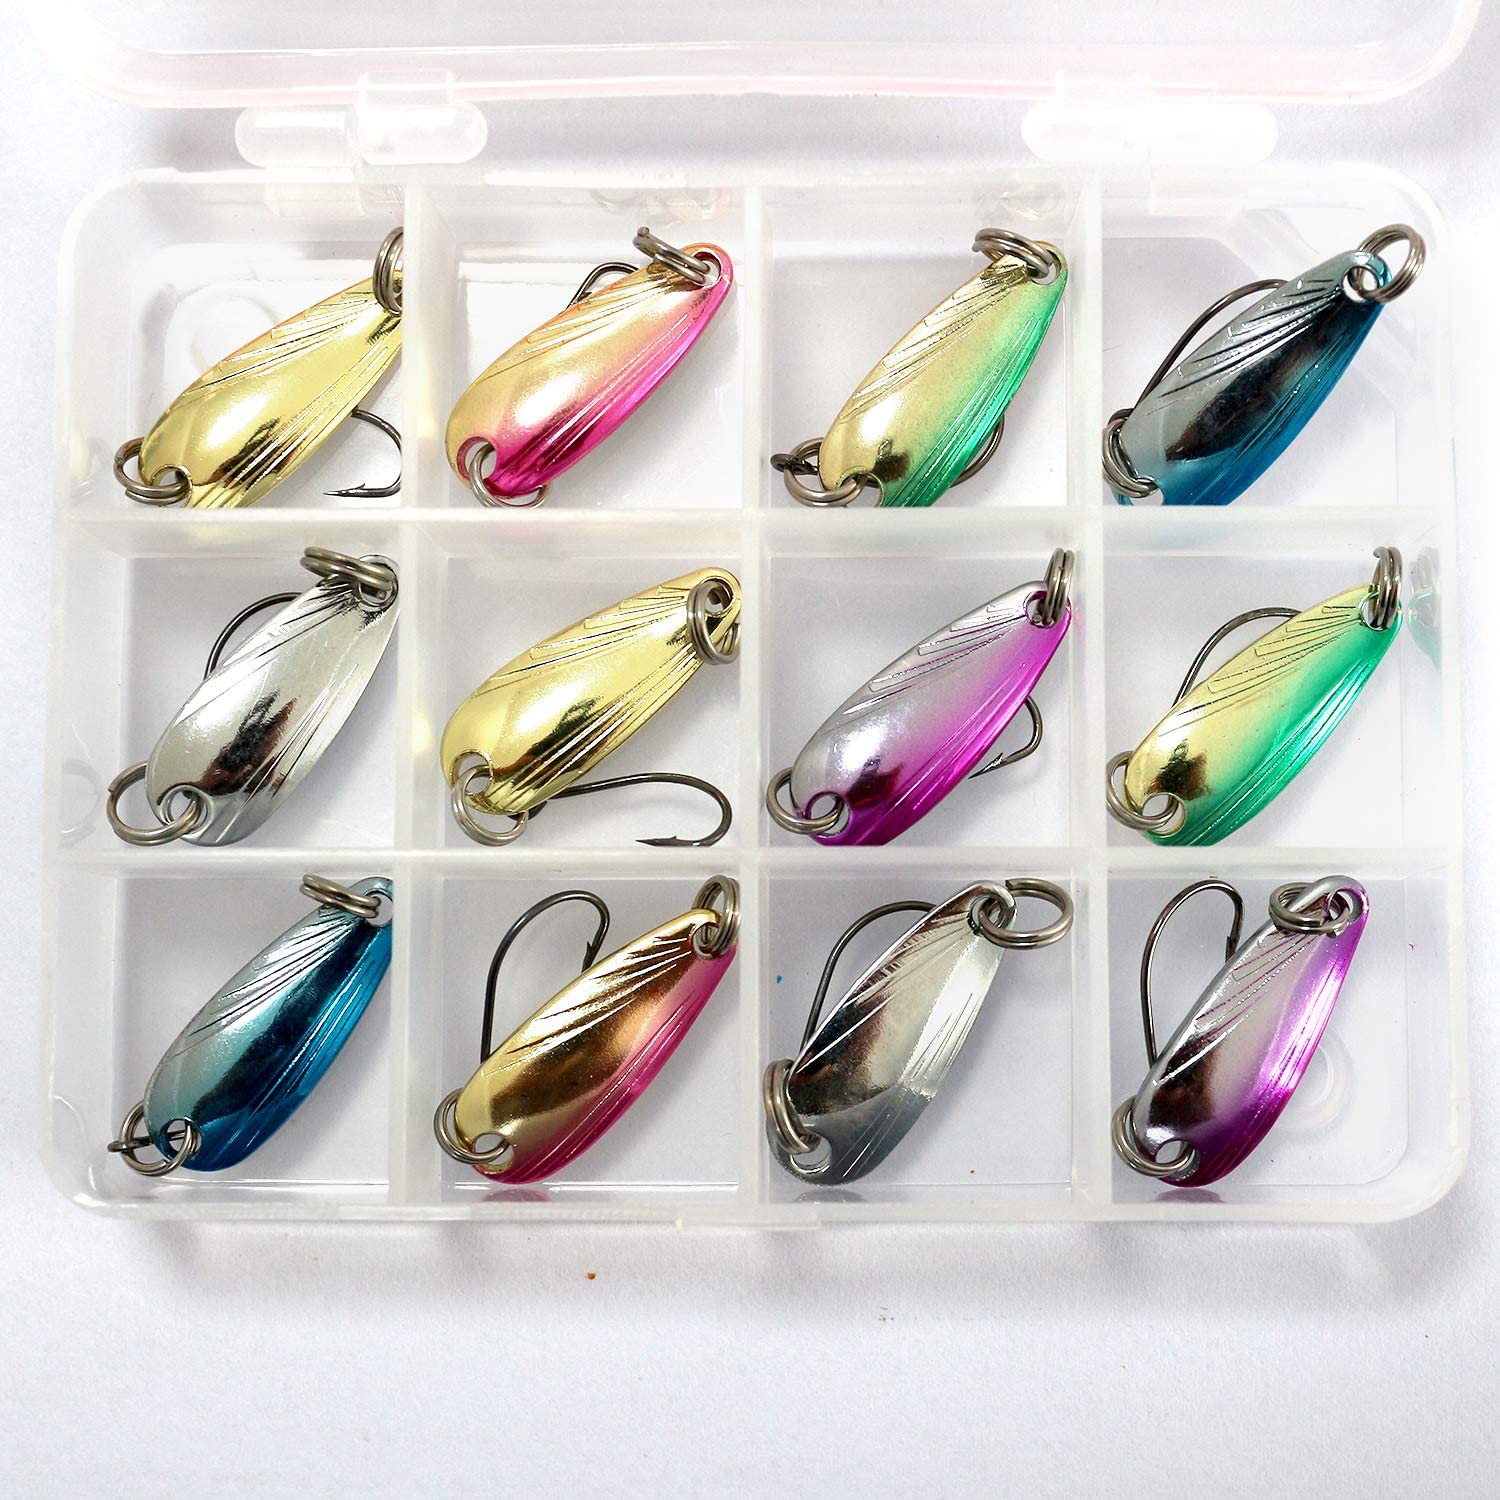 FitTrek Fishing Spoon Lure Set | Gift | Pike | Largemouth Bass | Trout | Walleye | Perch | Crappie